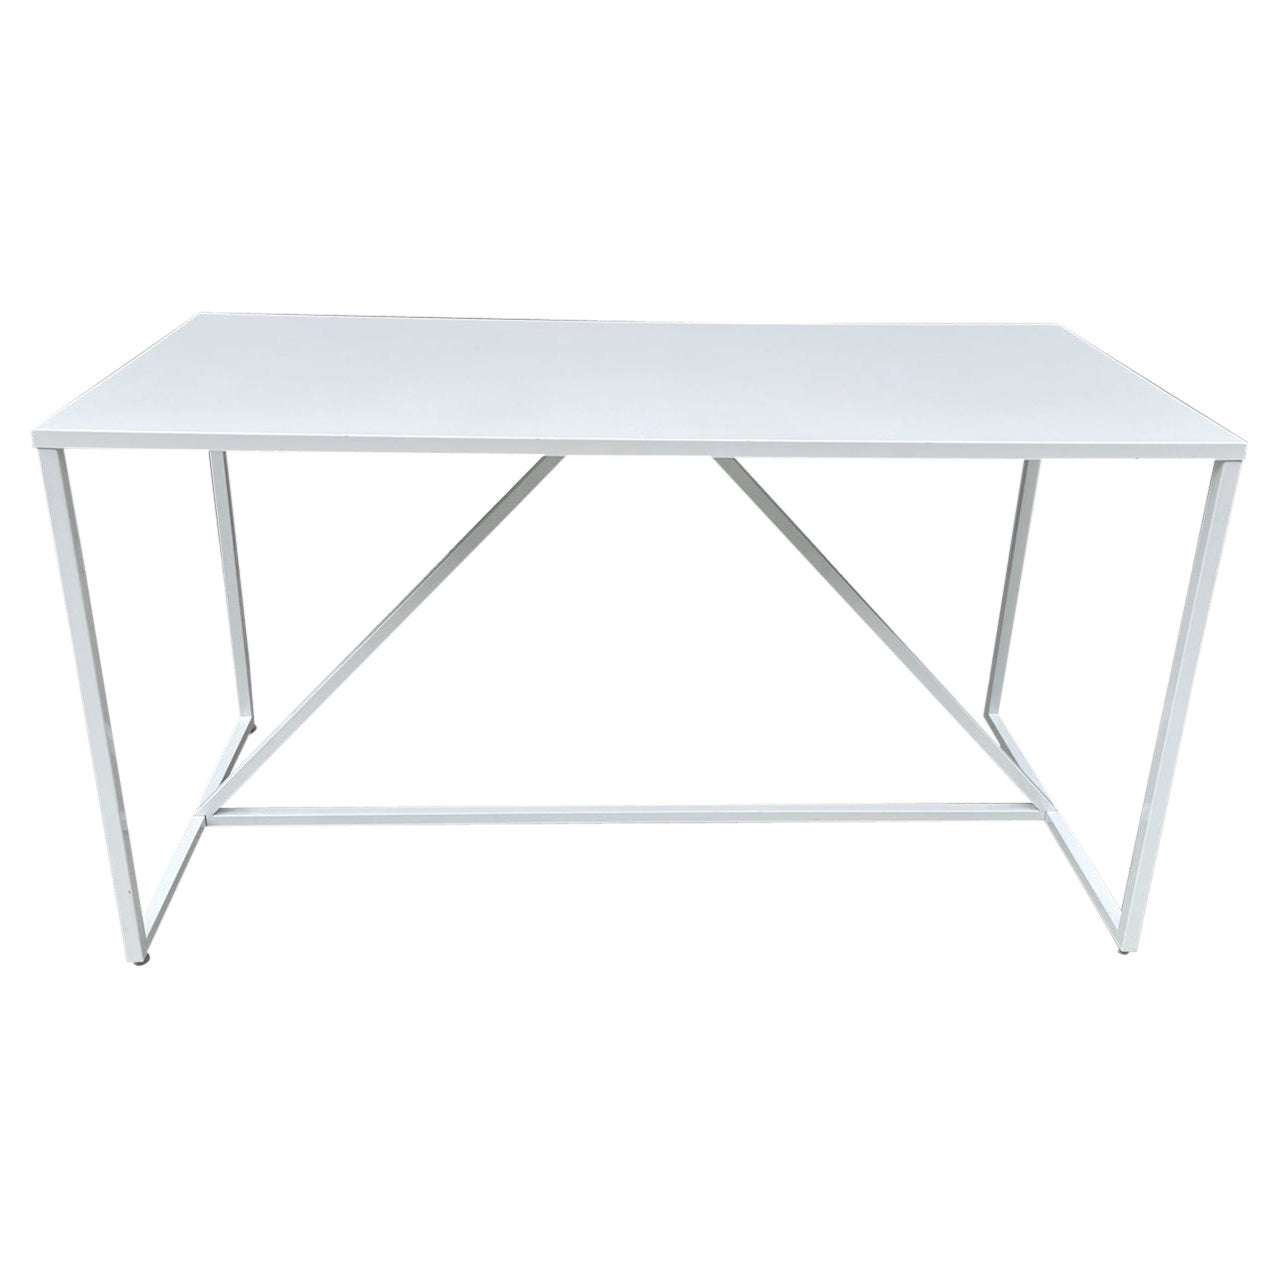 Desk or Bar Height Table in Metal and Powder Coated